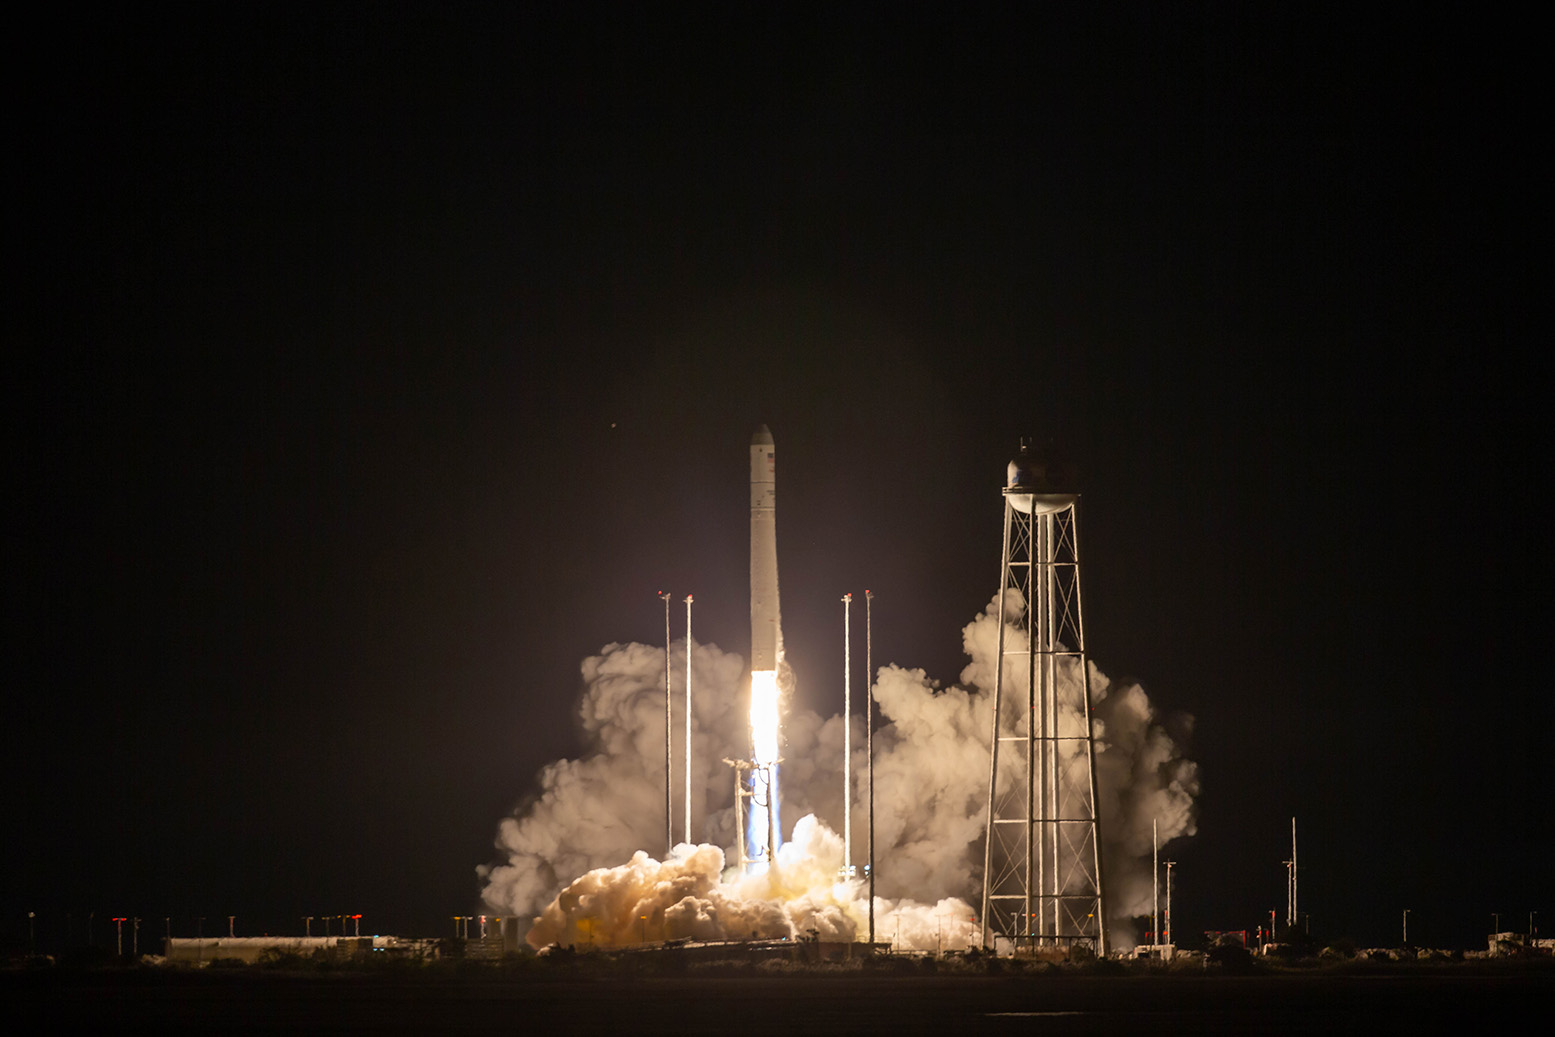 A Northrop Grumman Antares rocket launches to the International Space Station on Oct. 2, 2020.